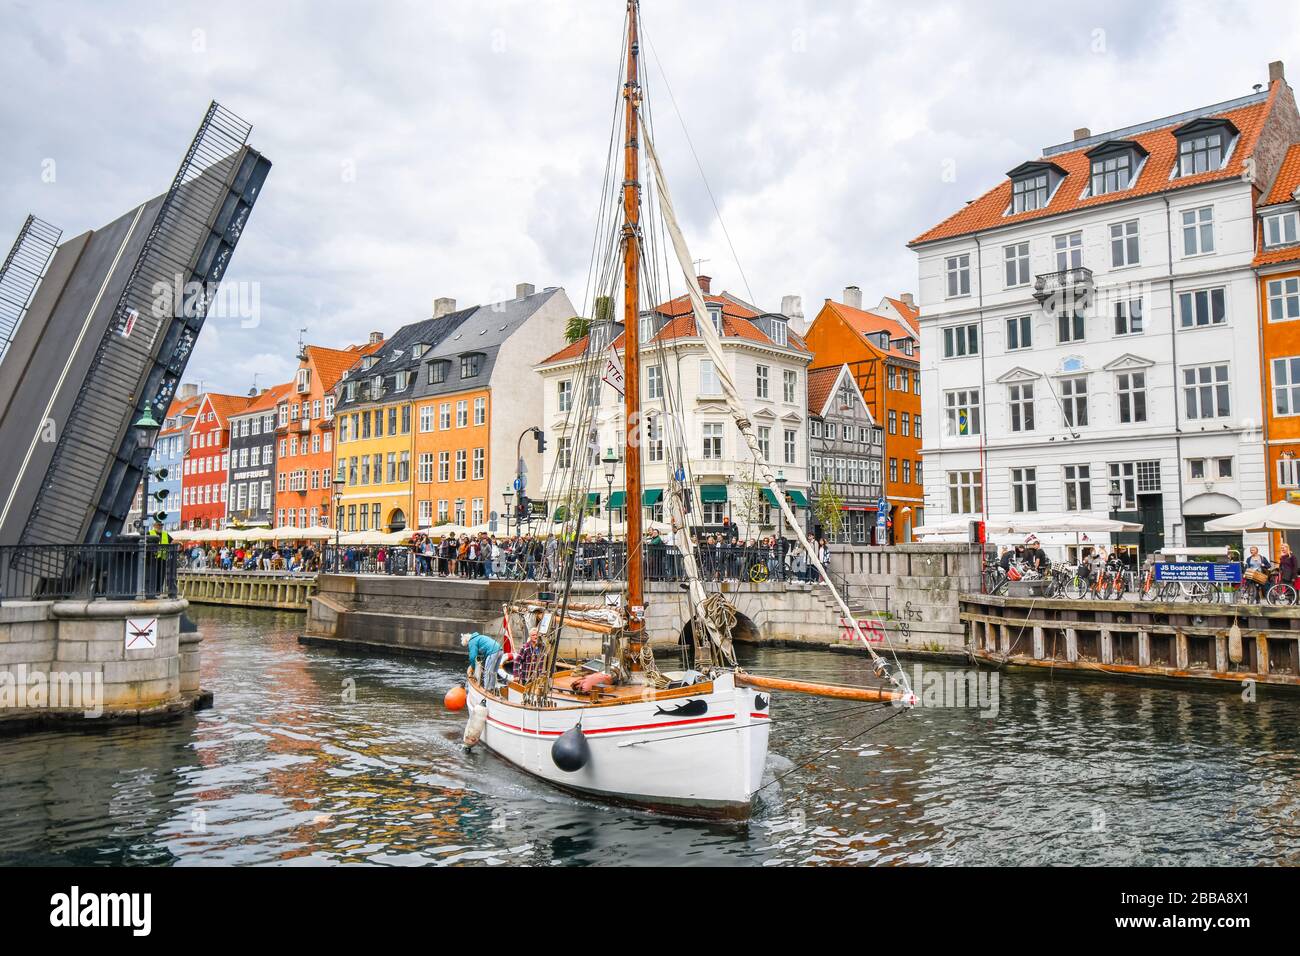 A sailboat glides through and under the opened bridge on the Nyhavn Canal in Copenhagen Denmark as tourists watch from shops and cafes alongside. Stock Photo